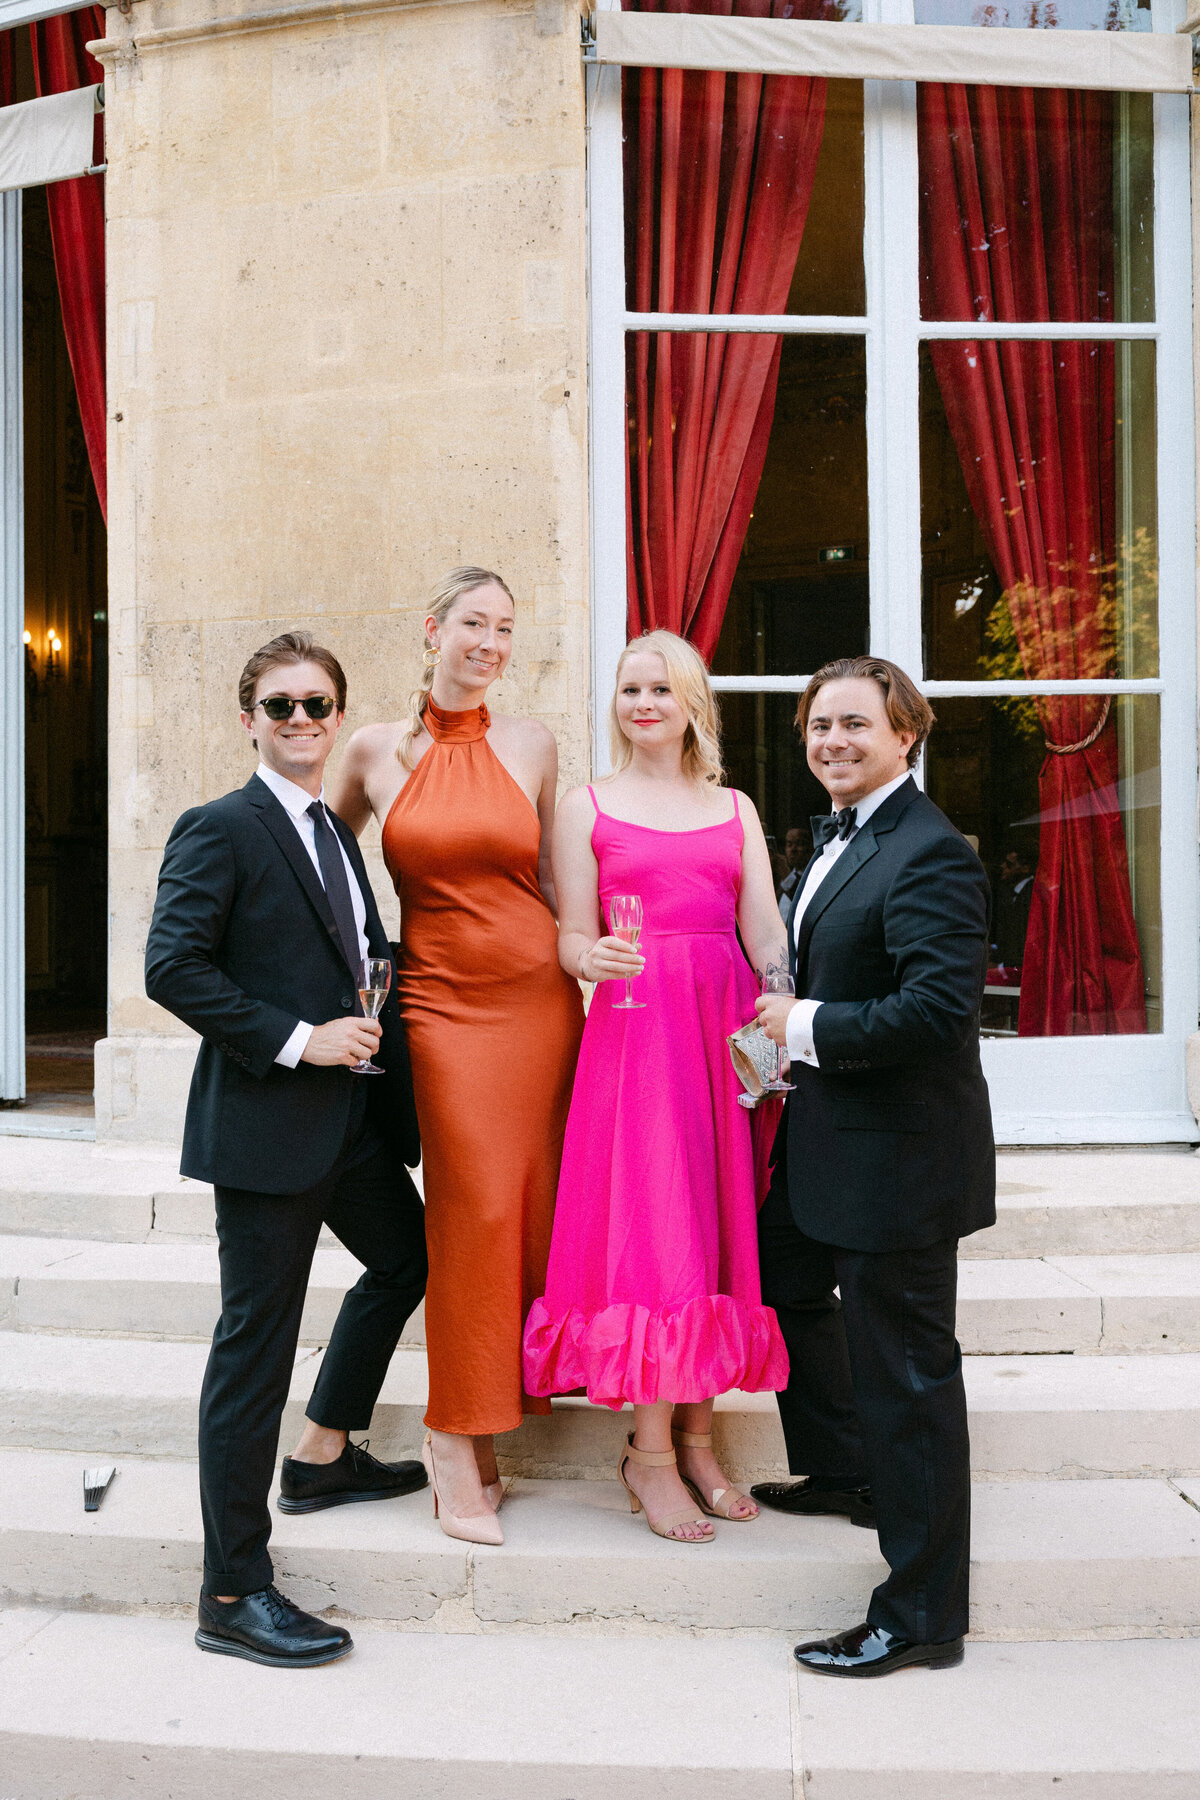 Jennifer Fox Weddings English speaking wedding planning & design agency in France crafting refined and bespoke weddings and celebrations Provence, Paris and destination wd730